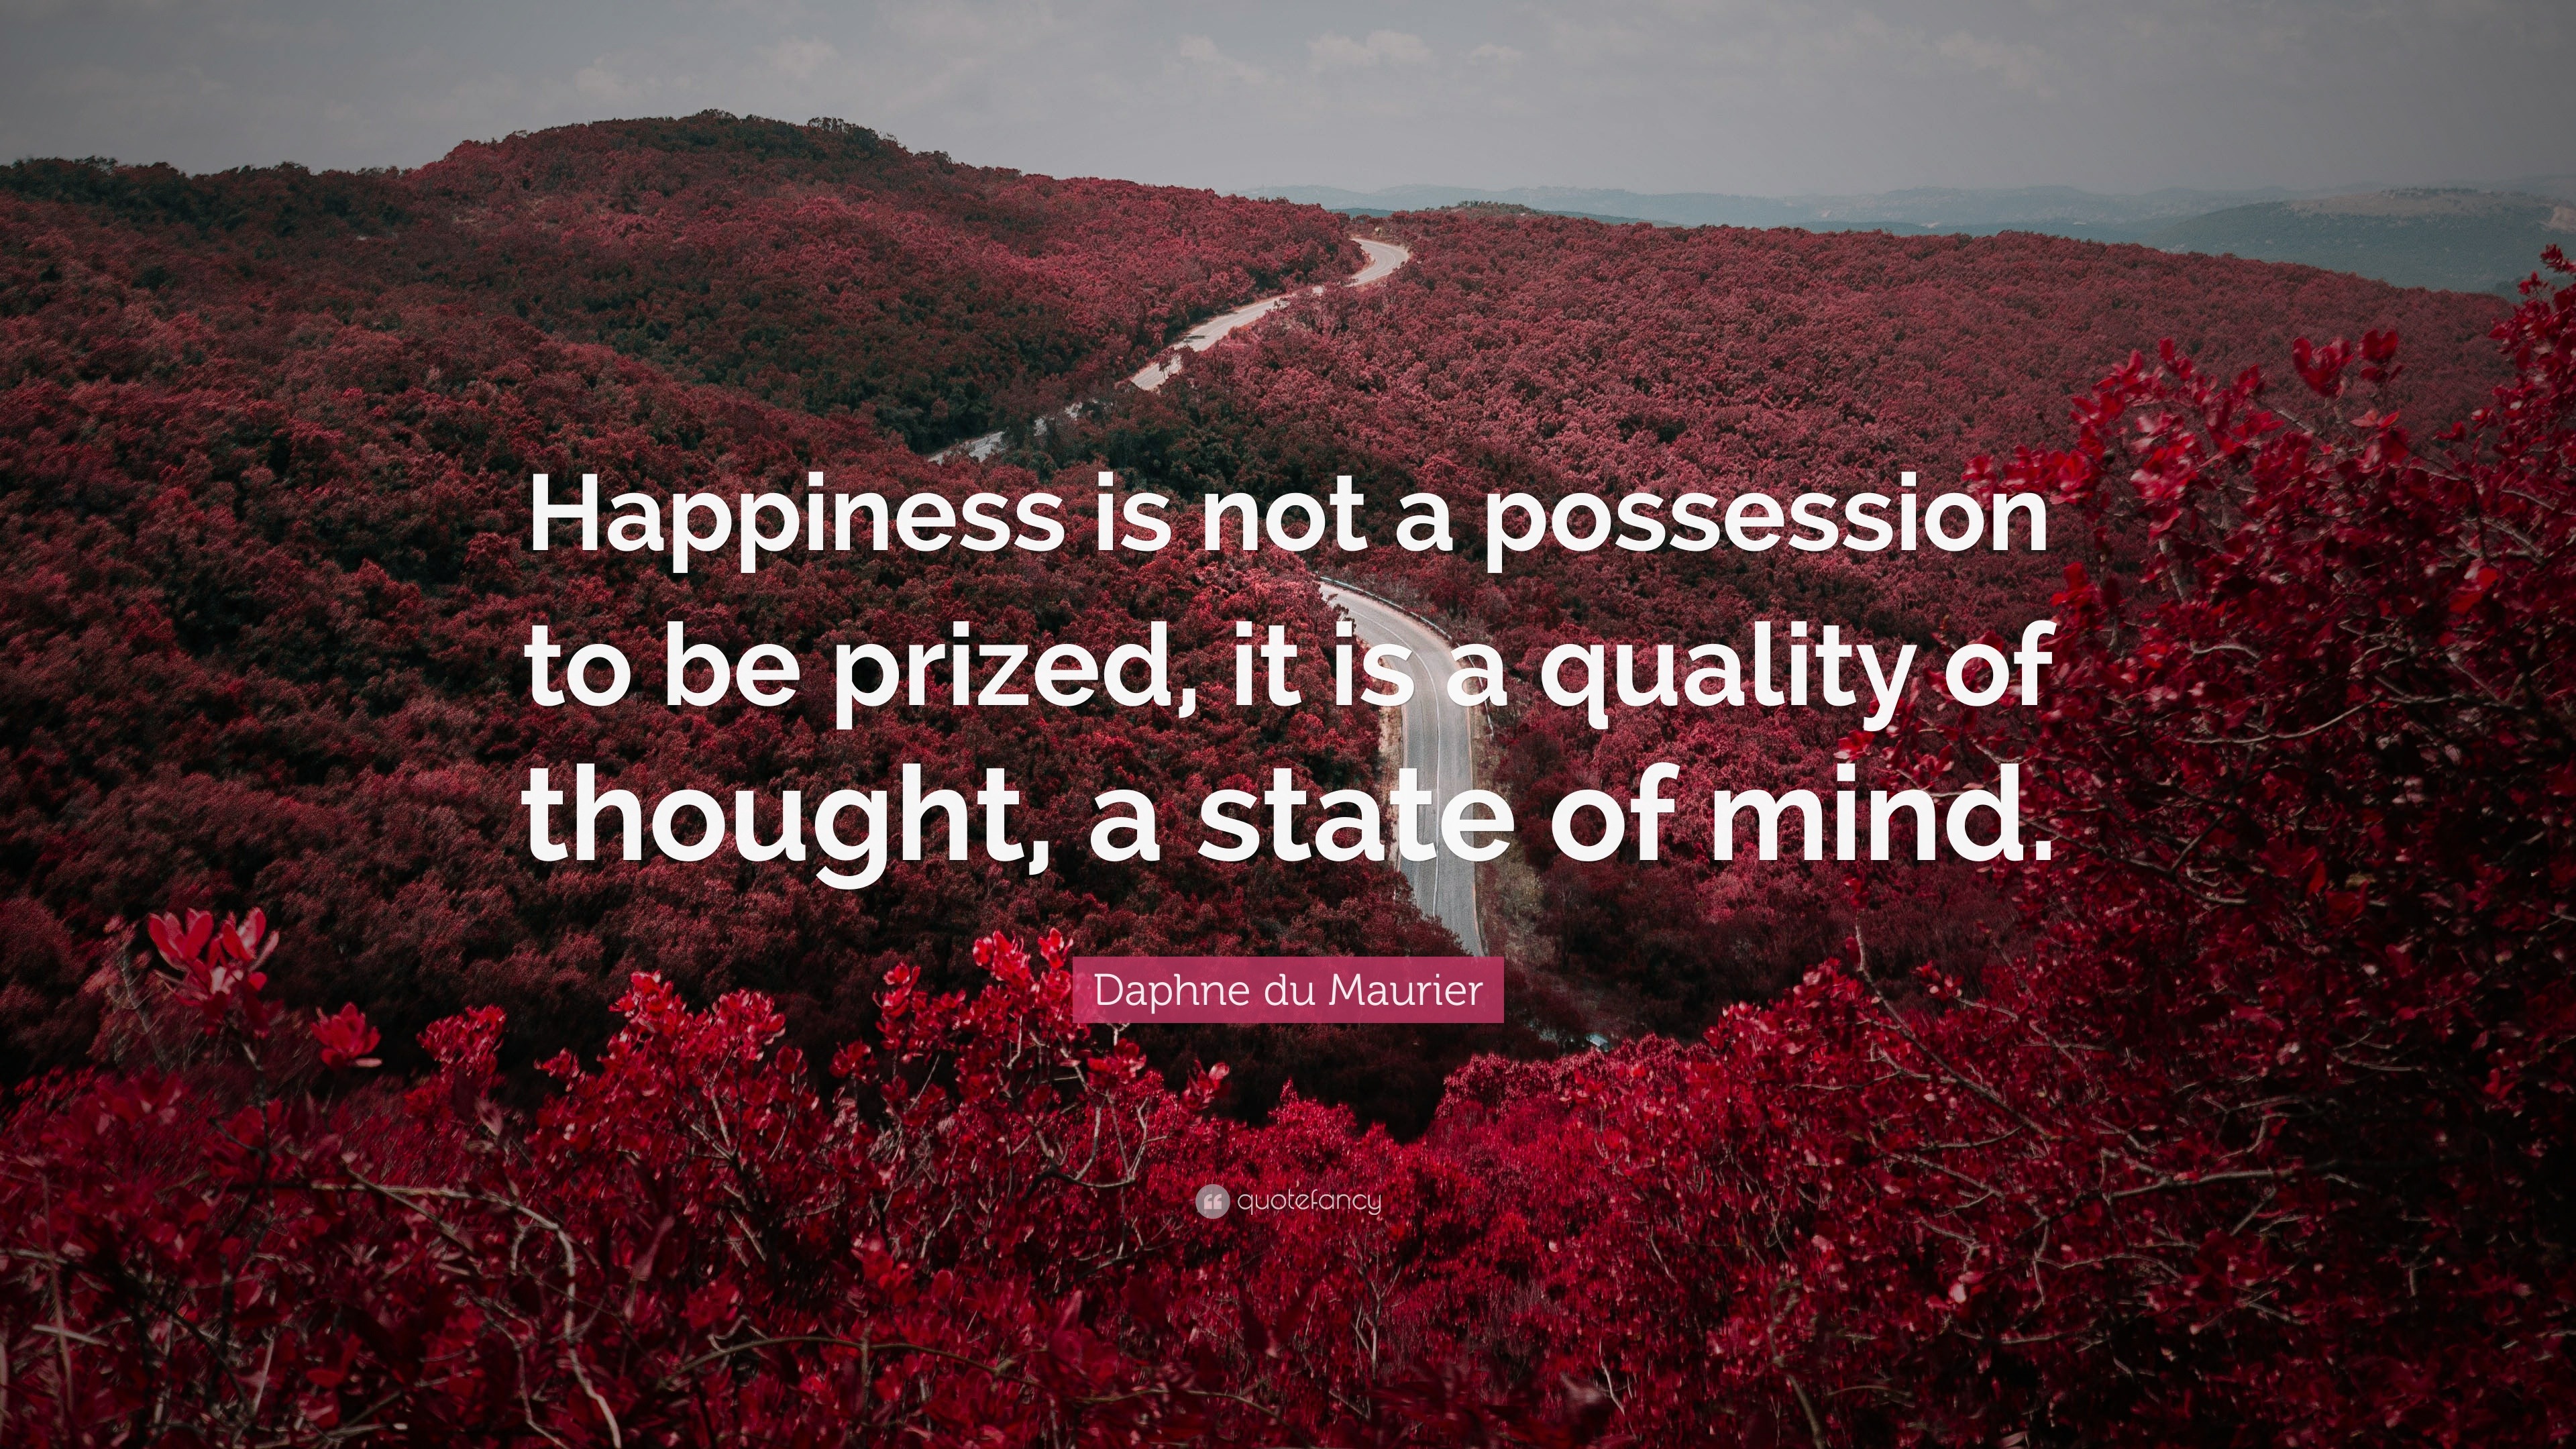 Mind Quotes “Happiness is not a possession to be prized it is a